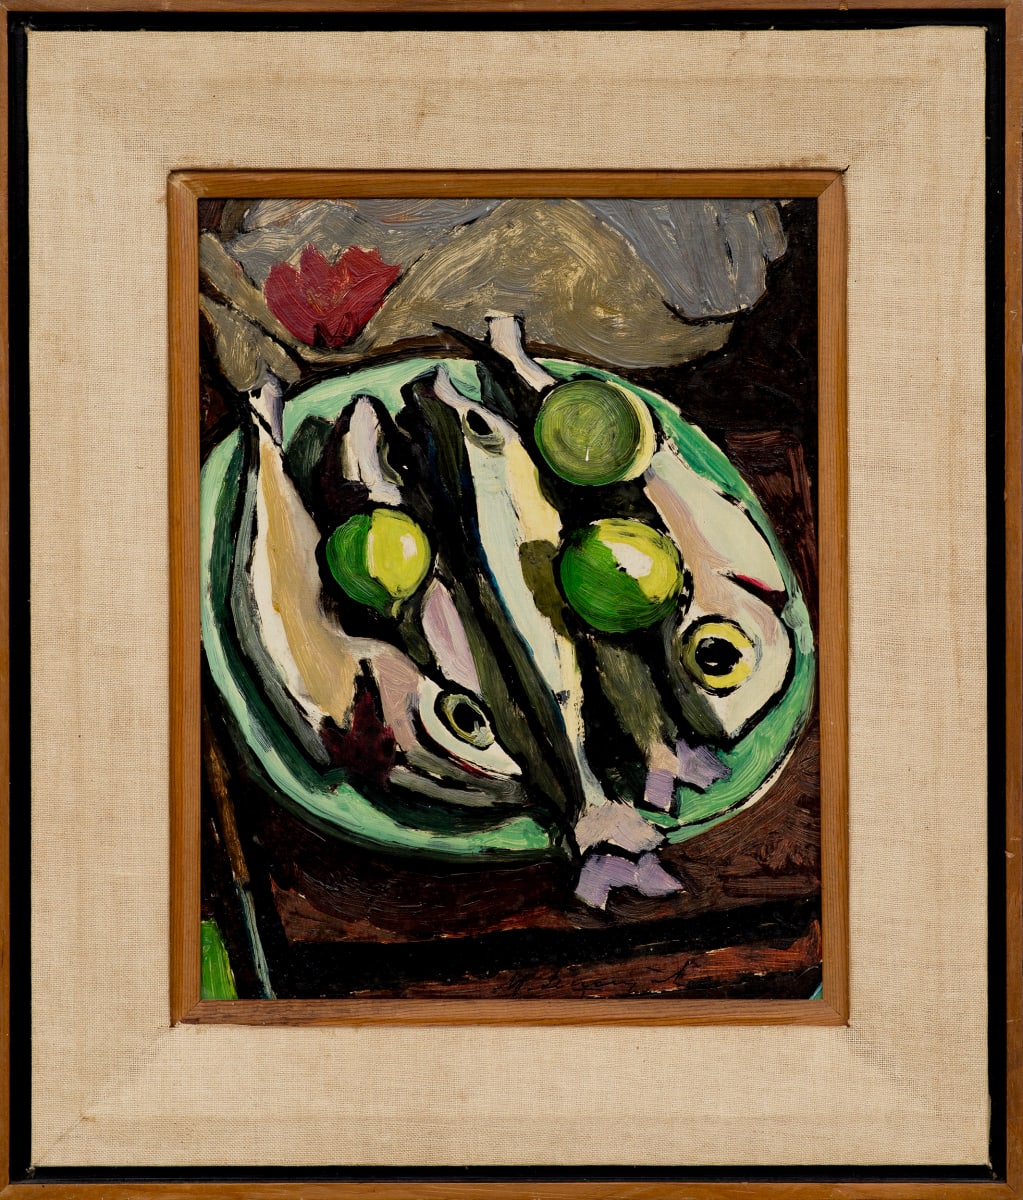 Goggle Eyes and Lime (Alternate title: Fish with Limes) by Michael Lester  Image: Recto
